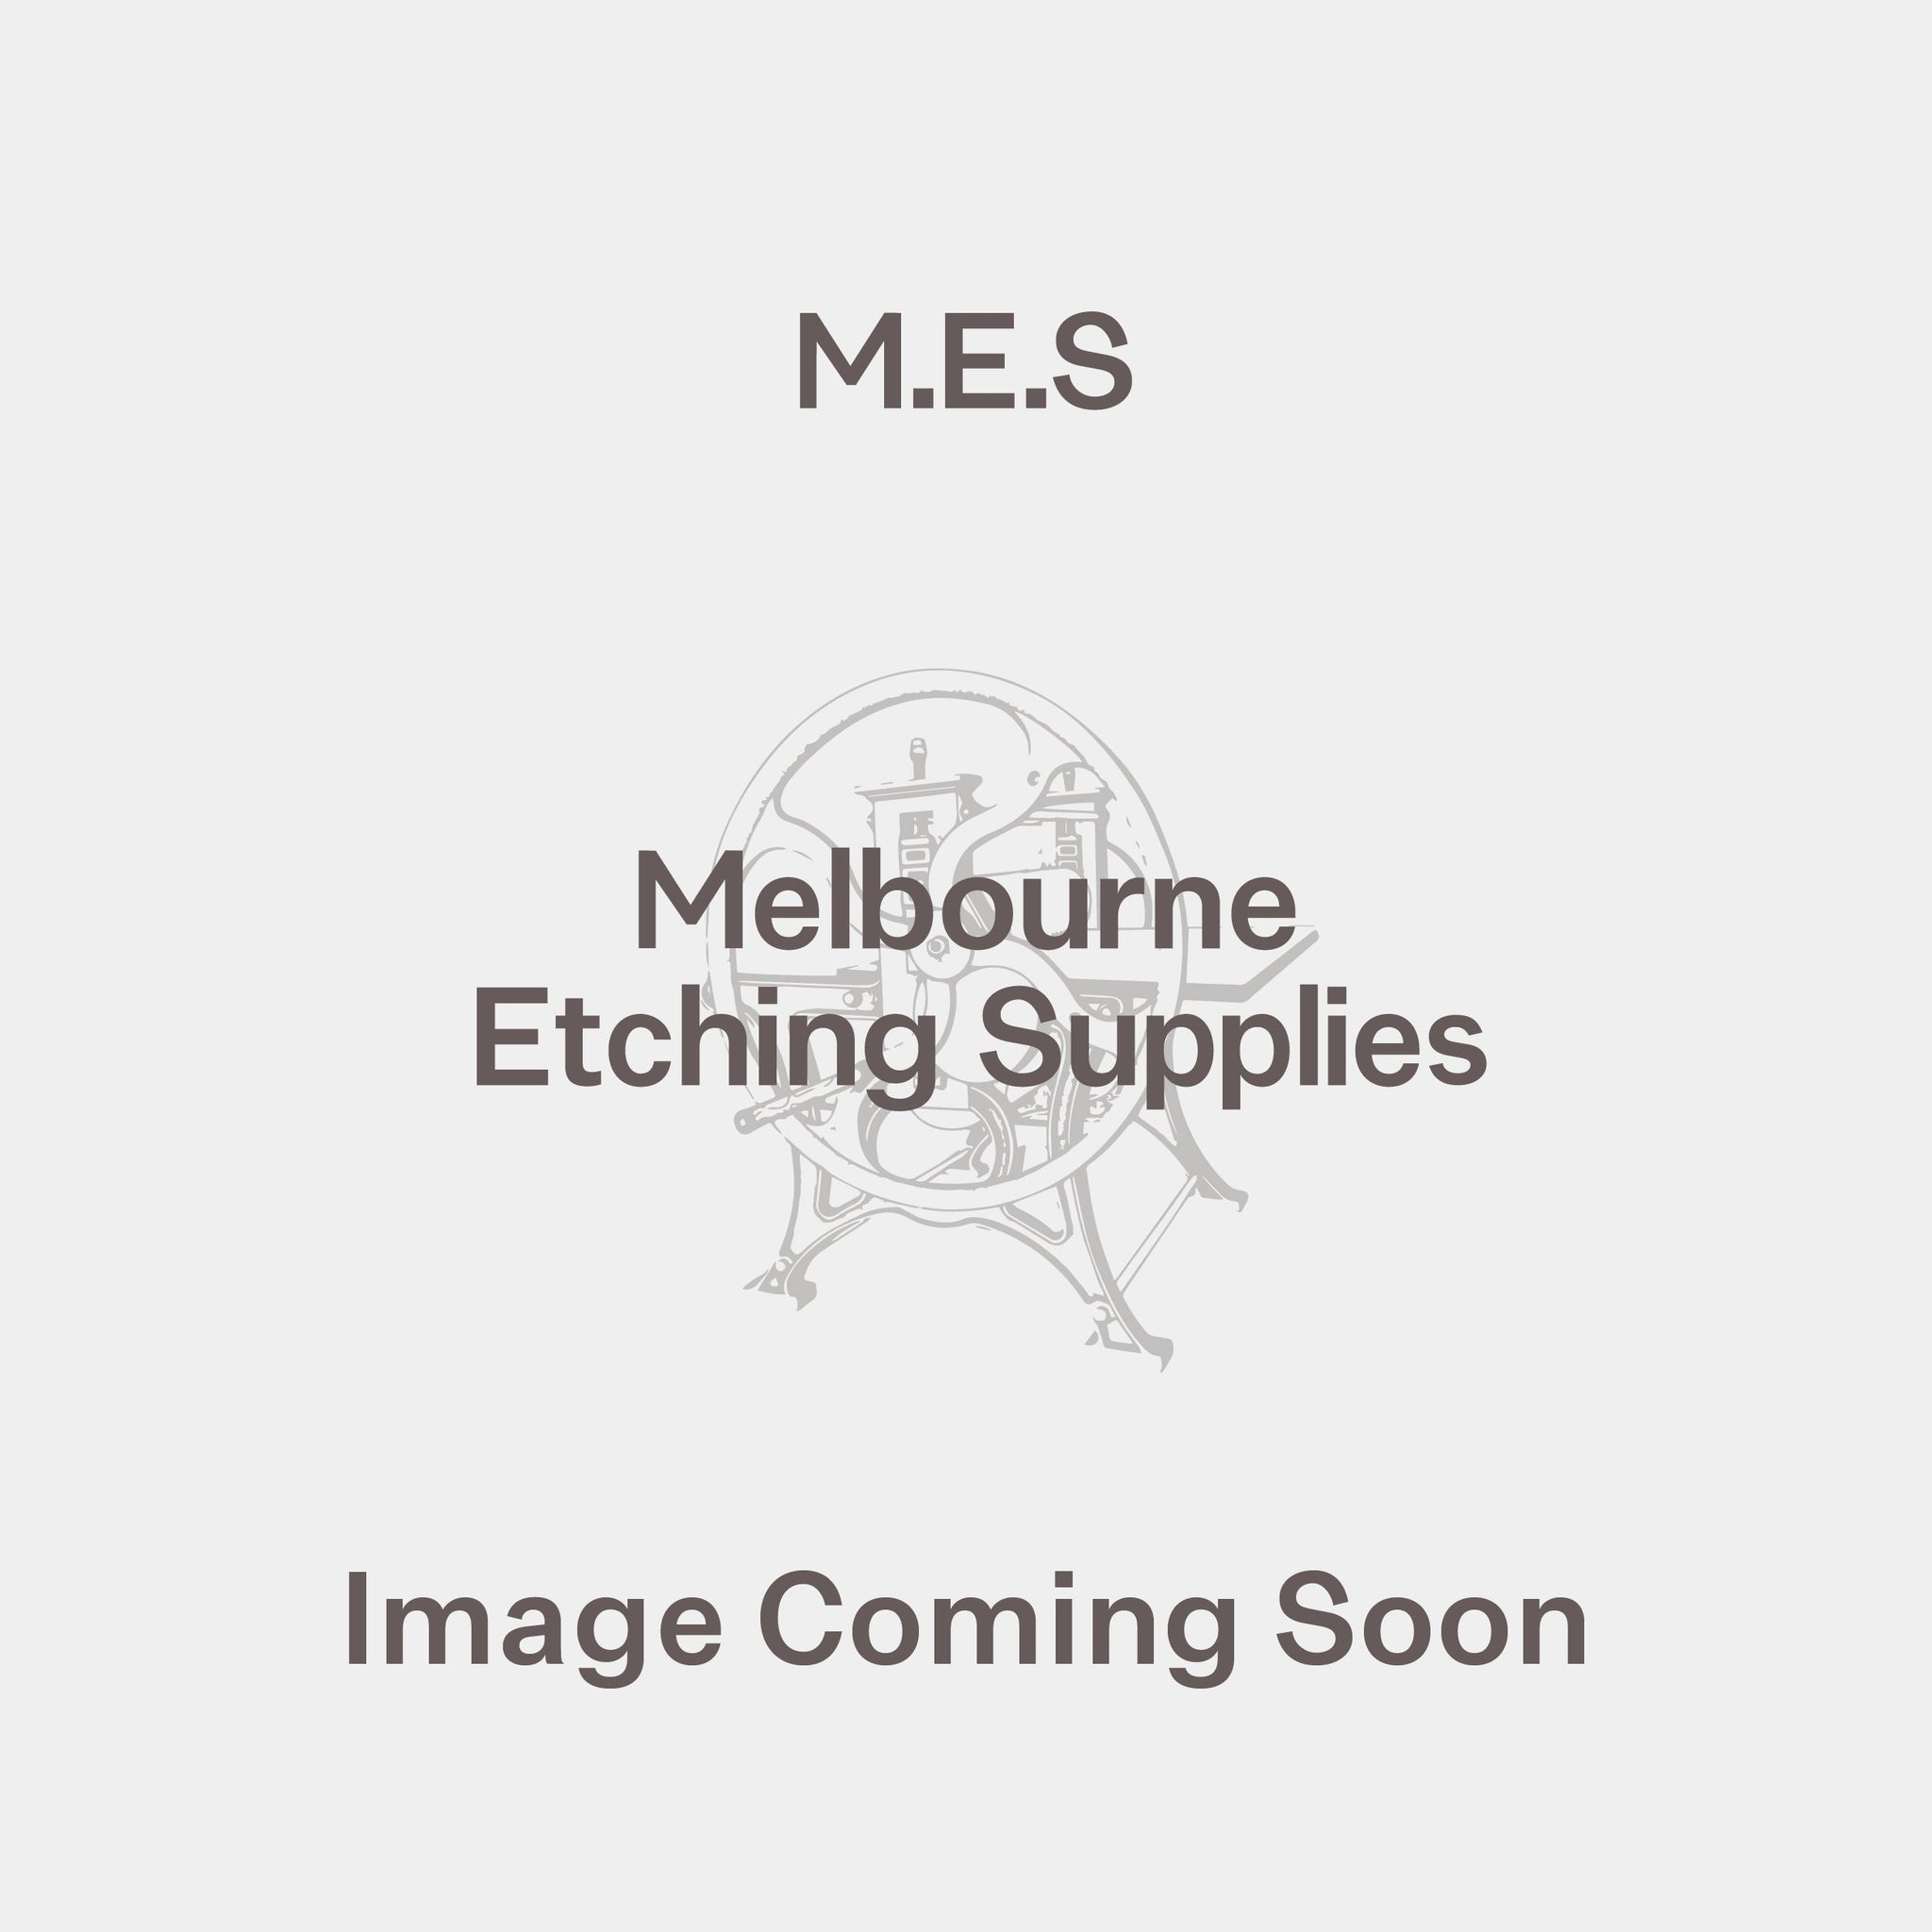 Cartridge A1 - Melbourne Etching Supplies